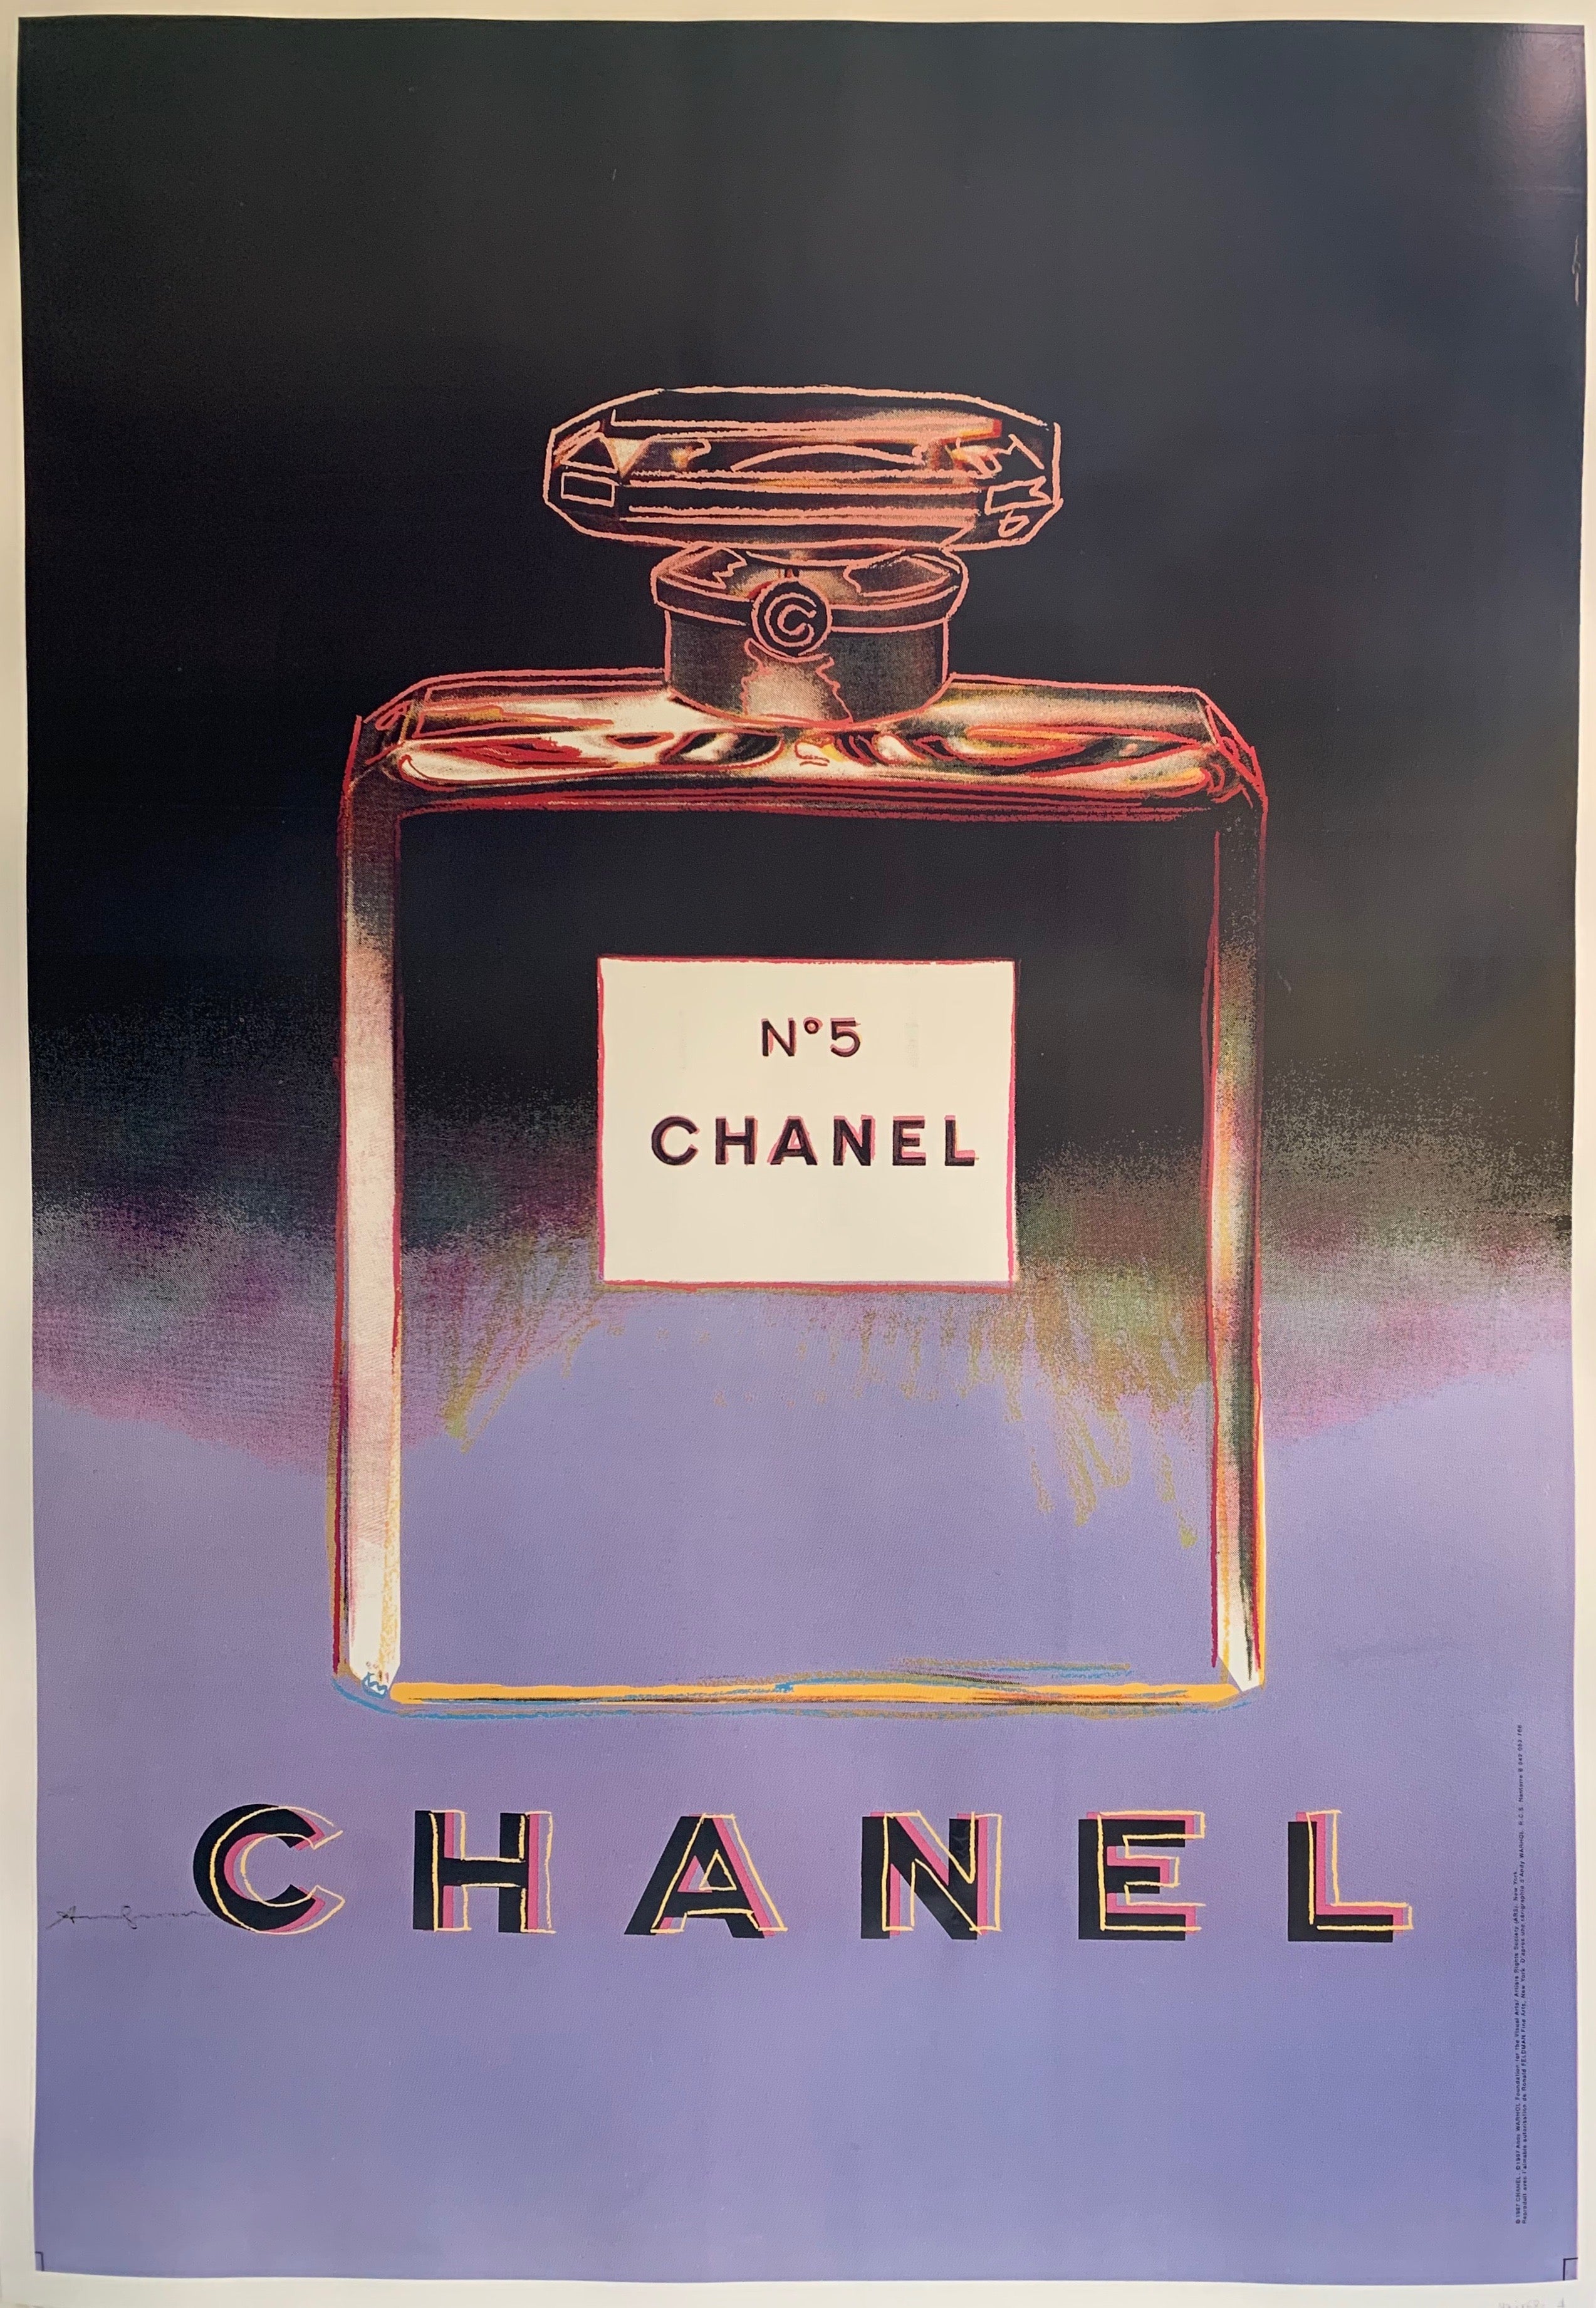 Chanel No. 5 ℗( Purple and Black) – Poster Museum